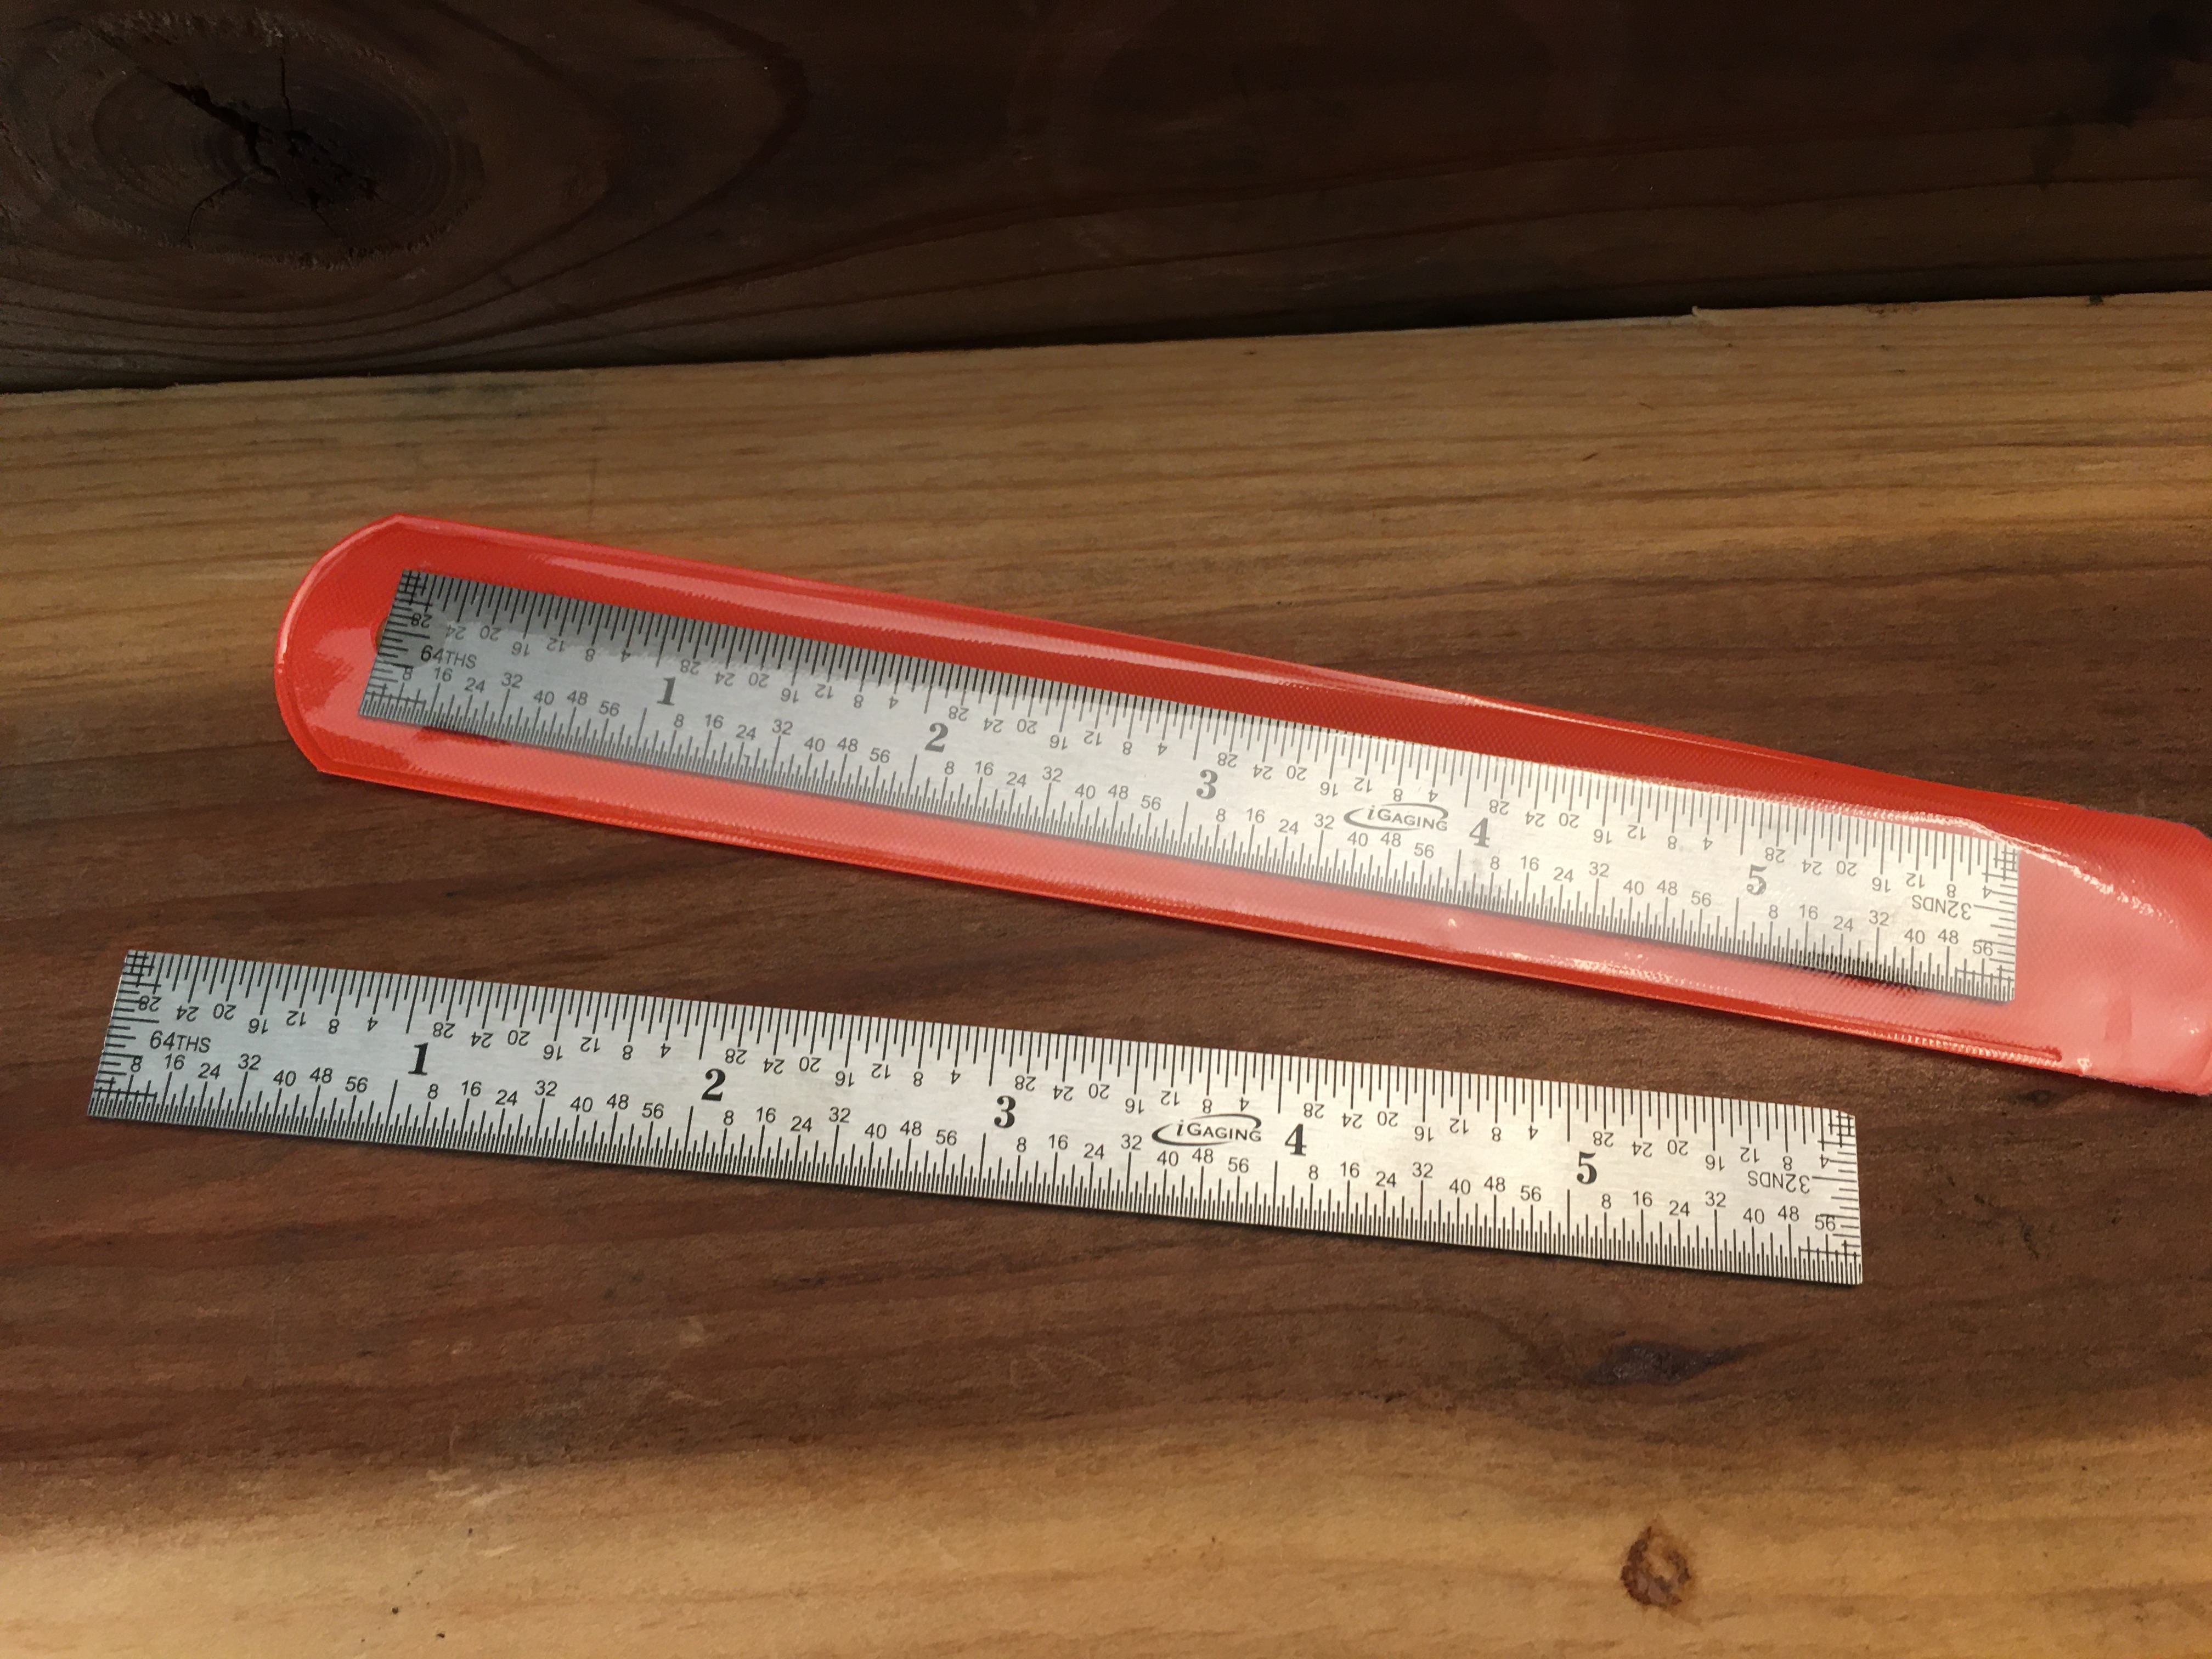 iGAGING 6 Flexible Stainless Standard and Metric Ruler with cork backing.  